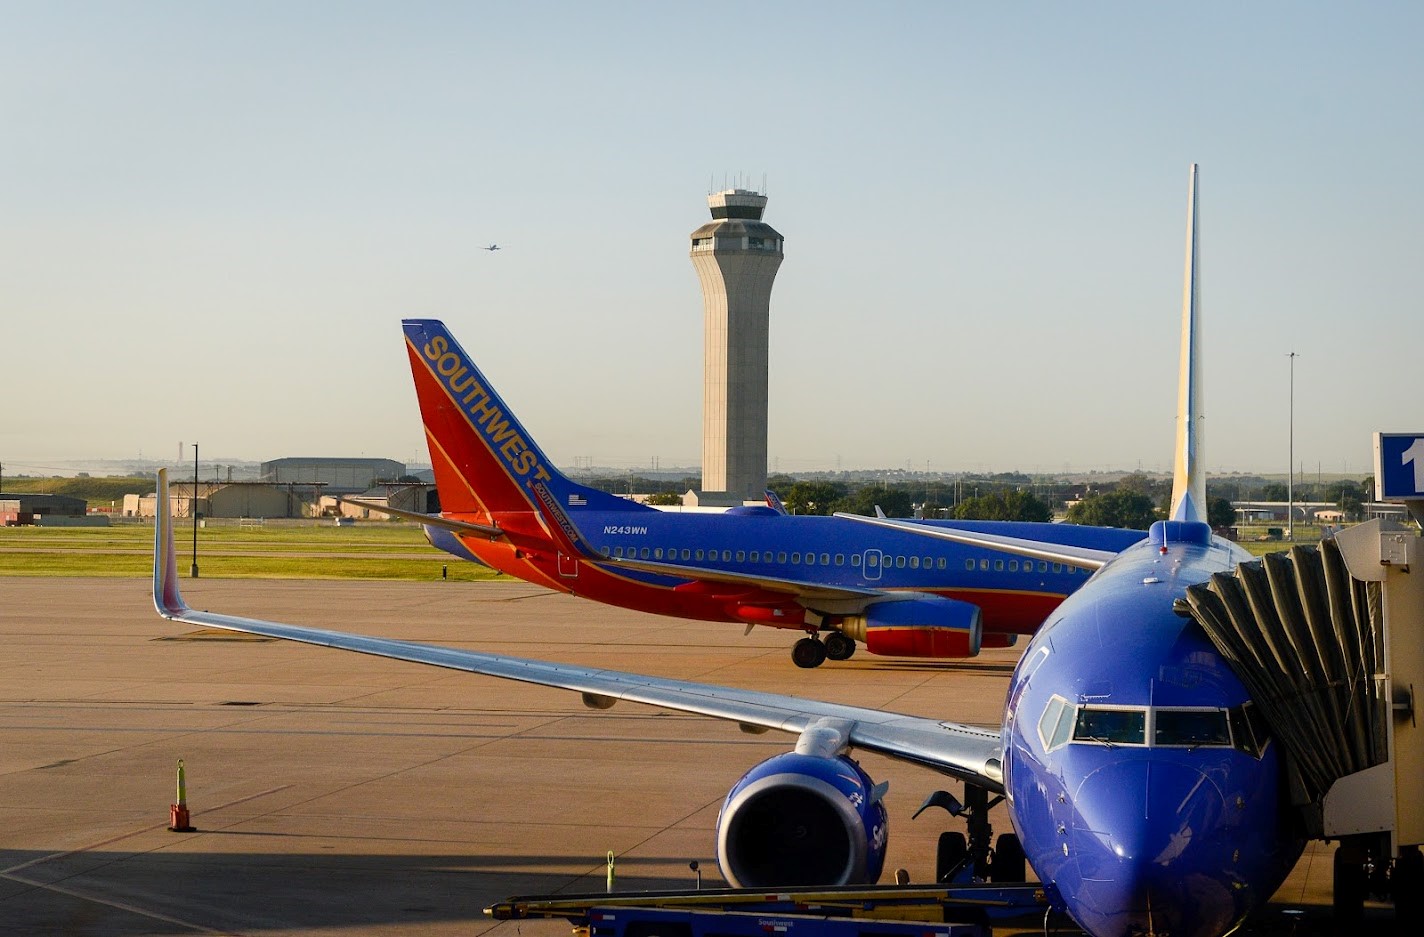 Southwest planes sit on the airfield. The FAA tower is in the background. 